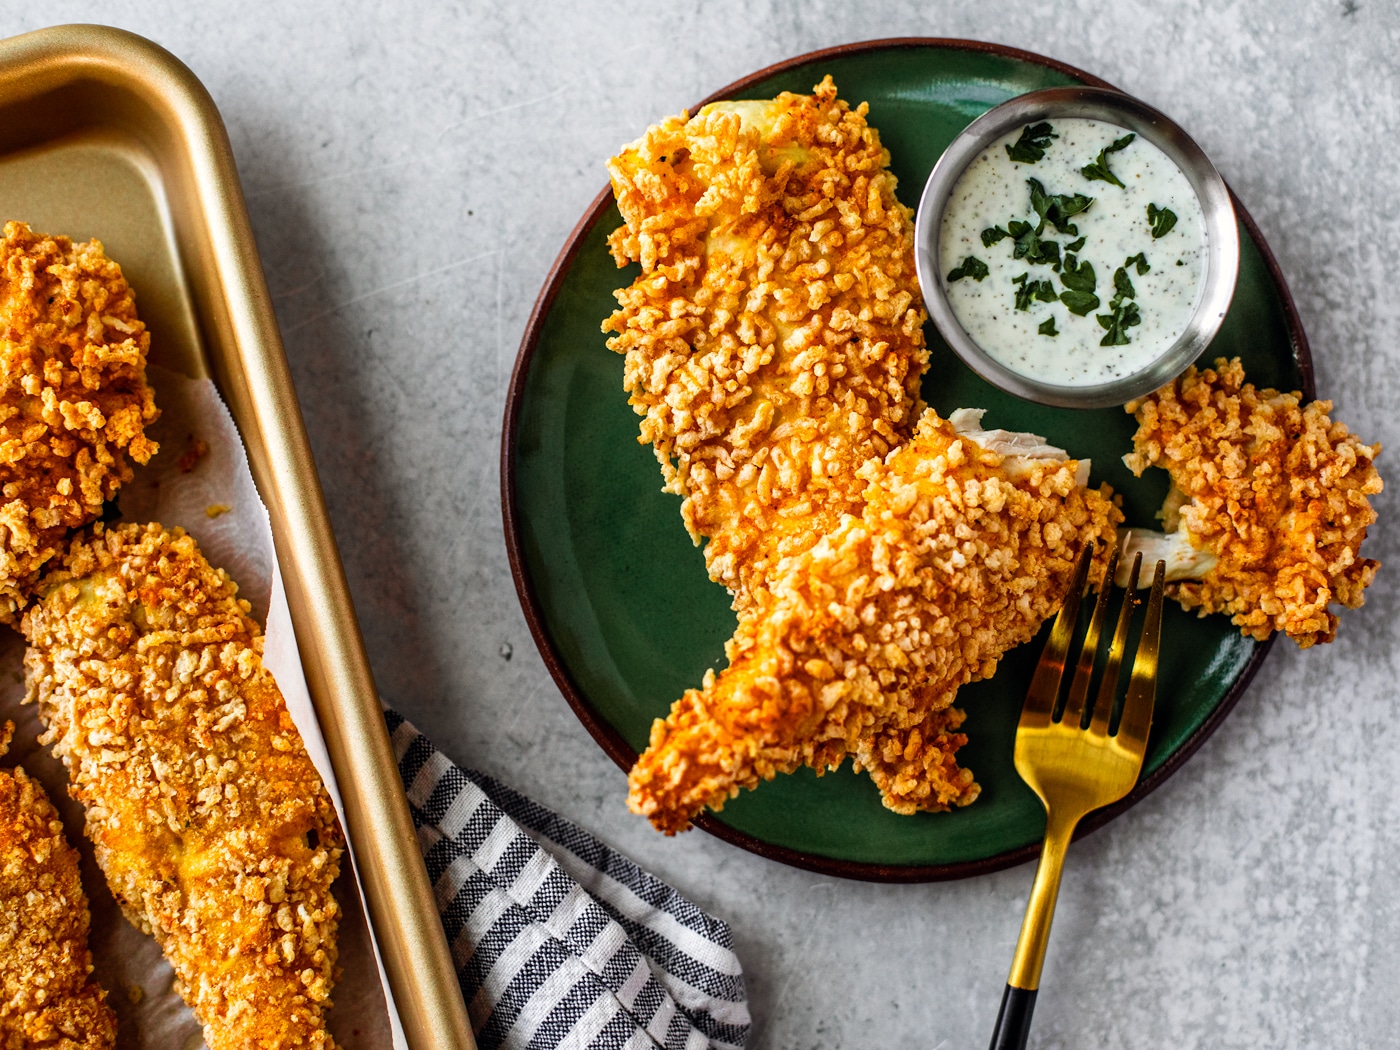 Fried chicken fingers with tzatziki sauce on a plate.